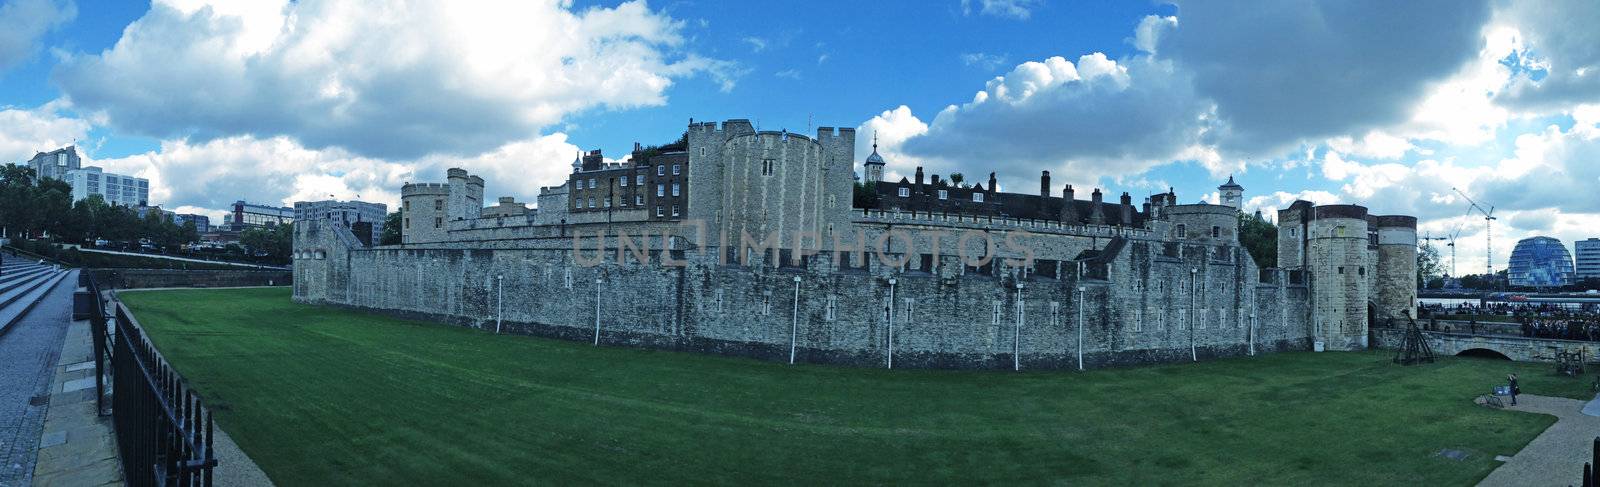 Tower of London Ancient Architecture - UK